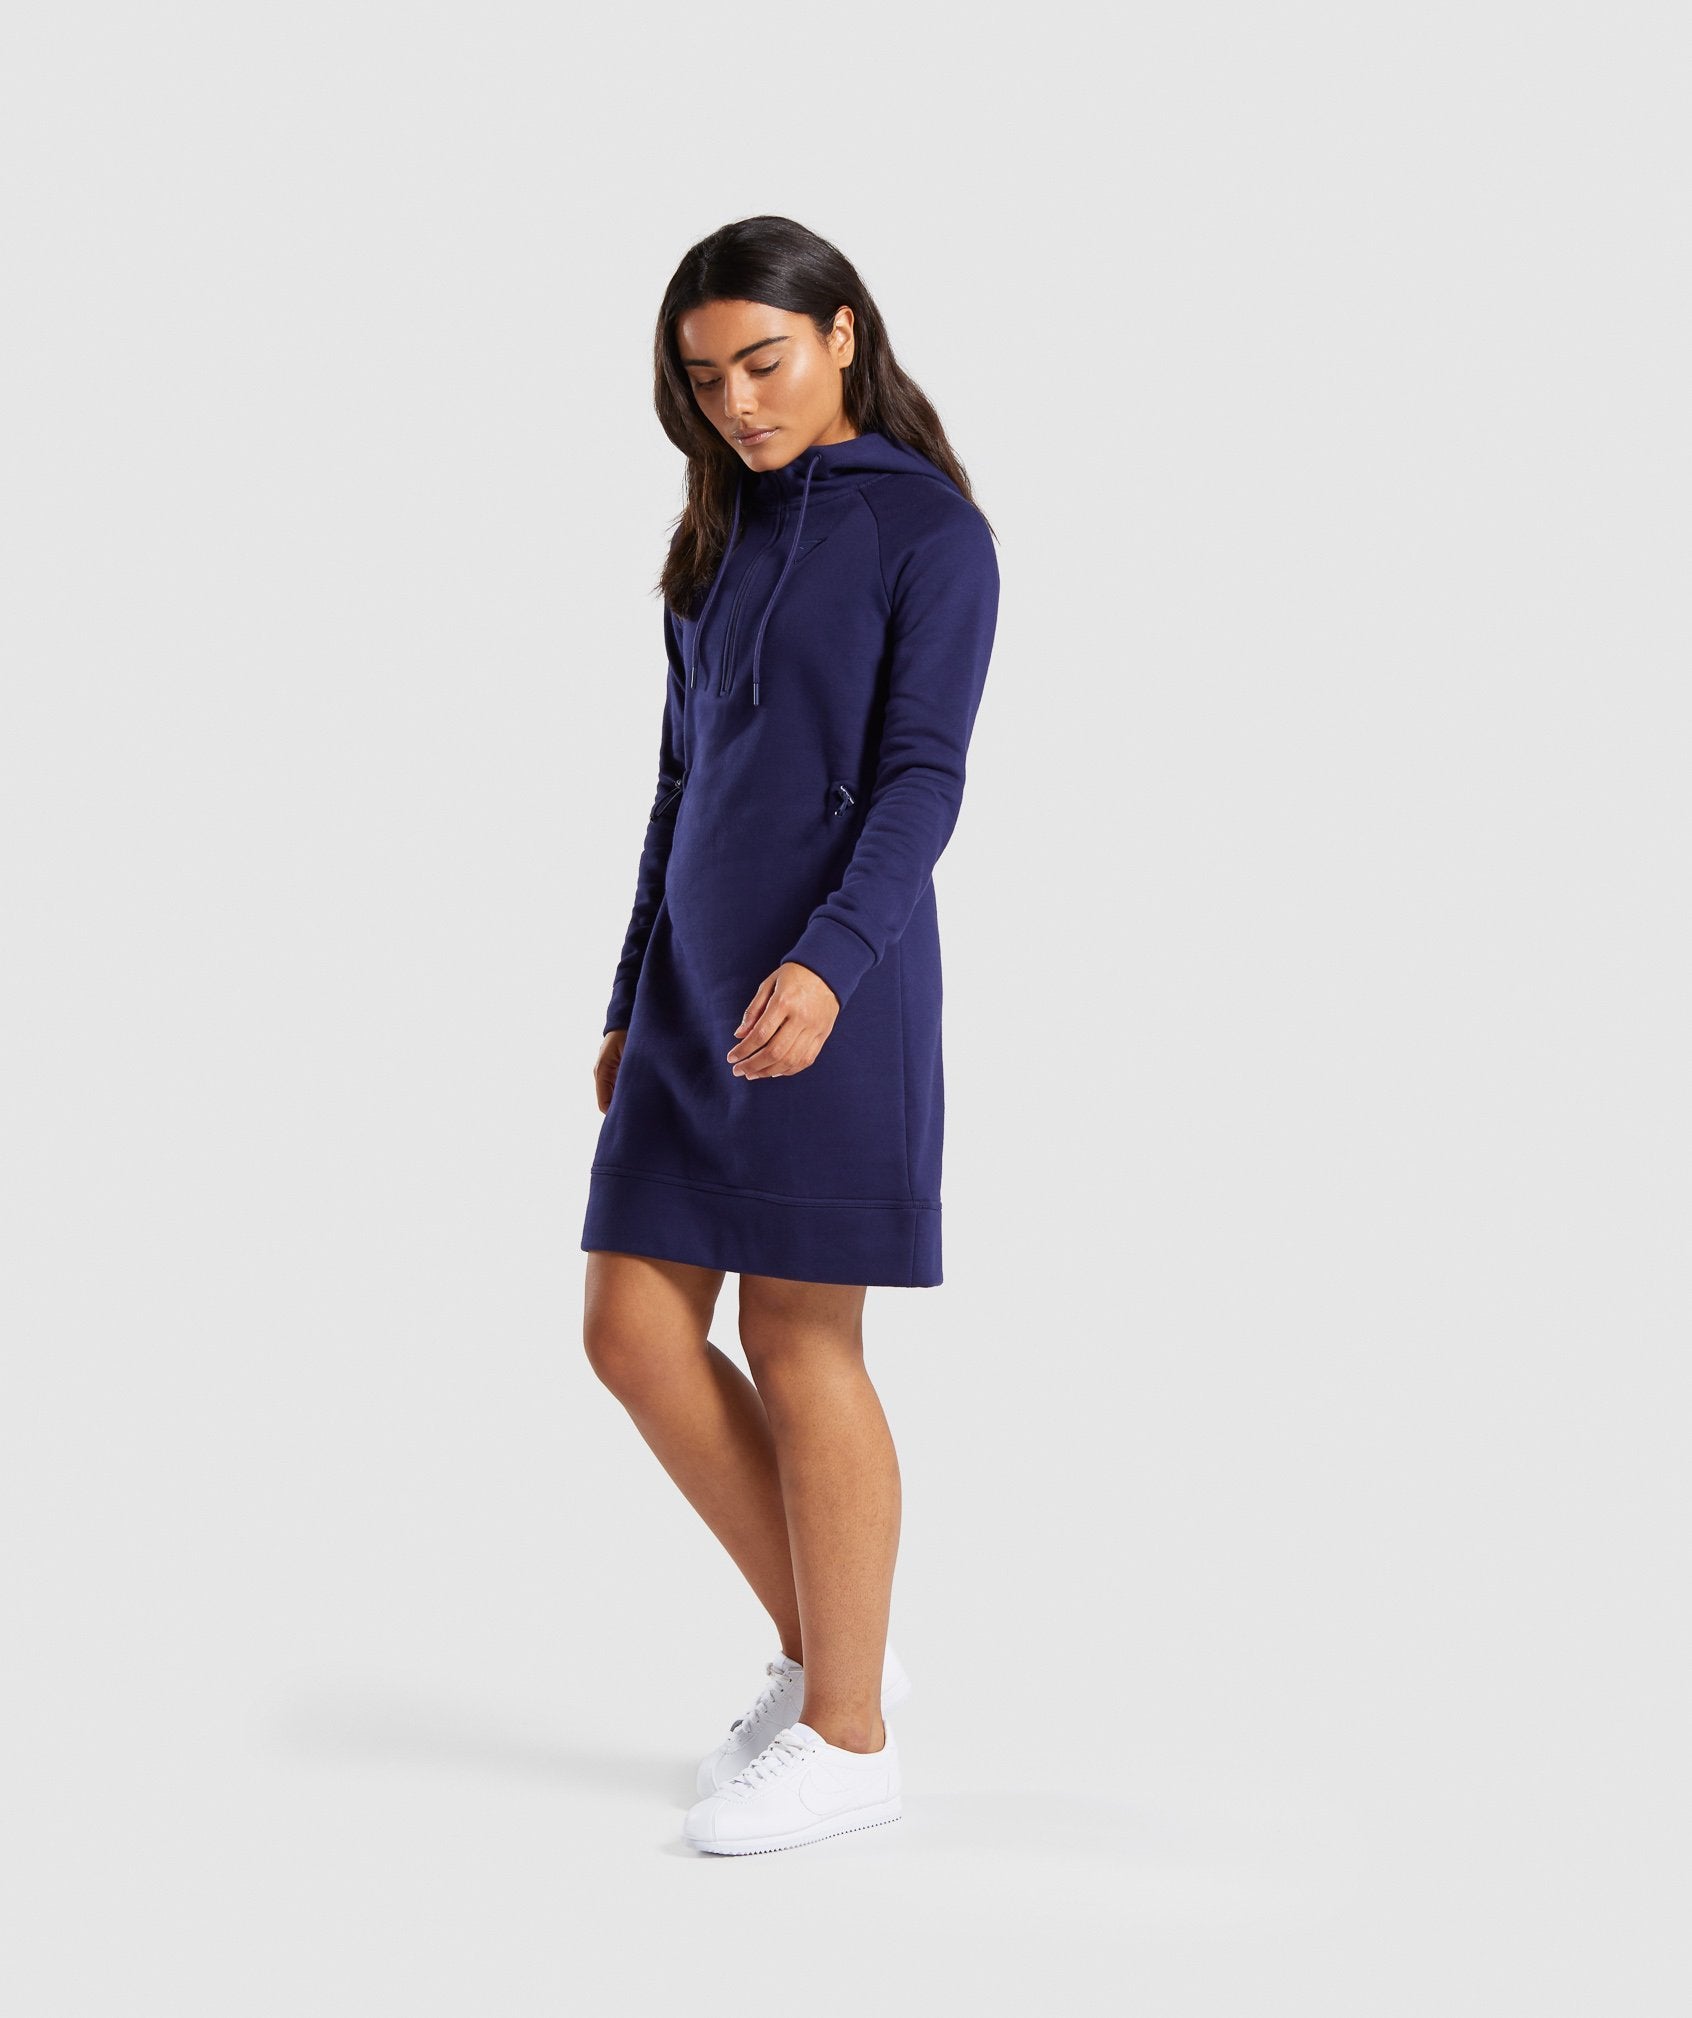 Slim Fit Hooded Dress in Evening Navy Blue - view 4